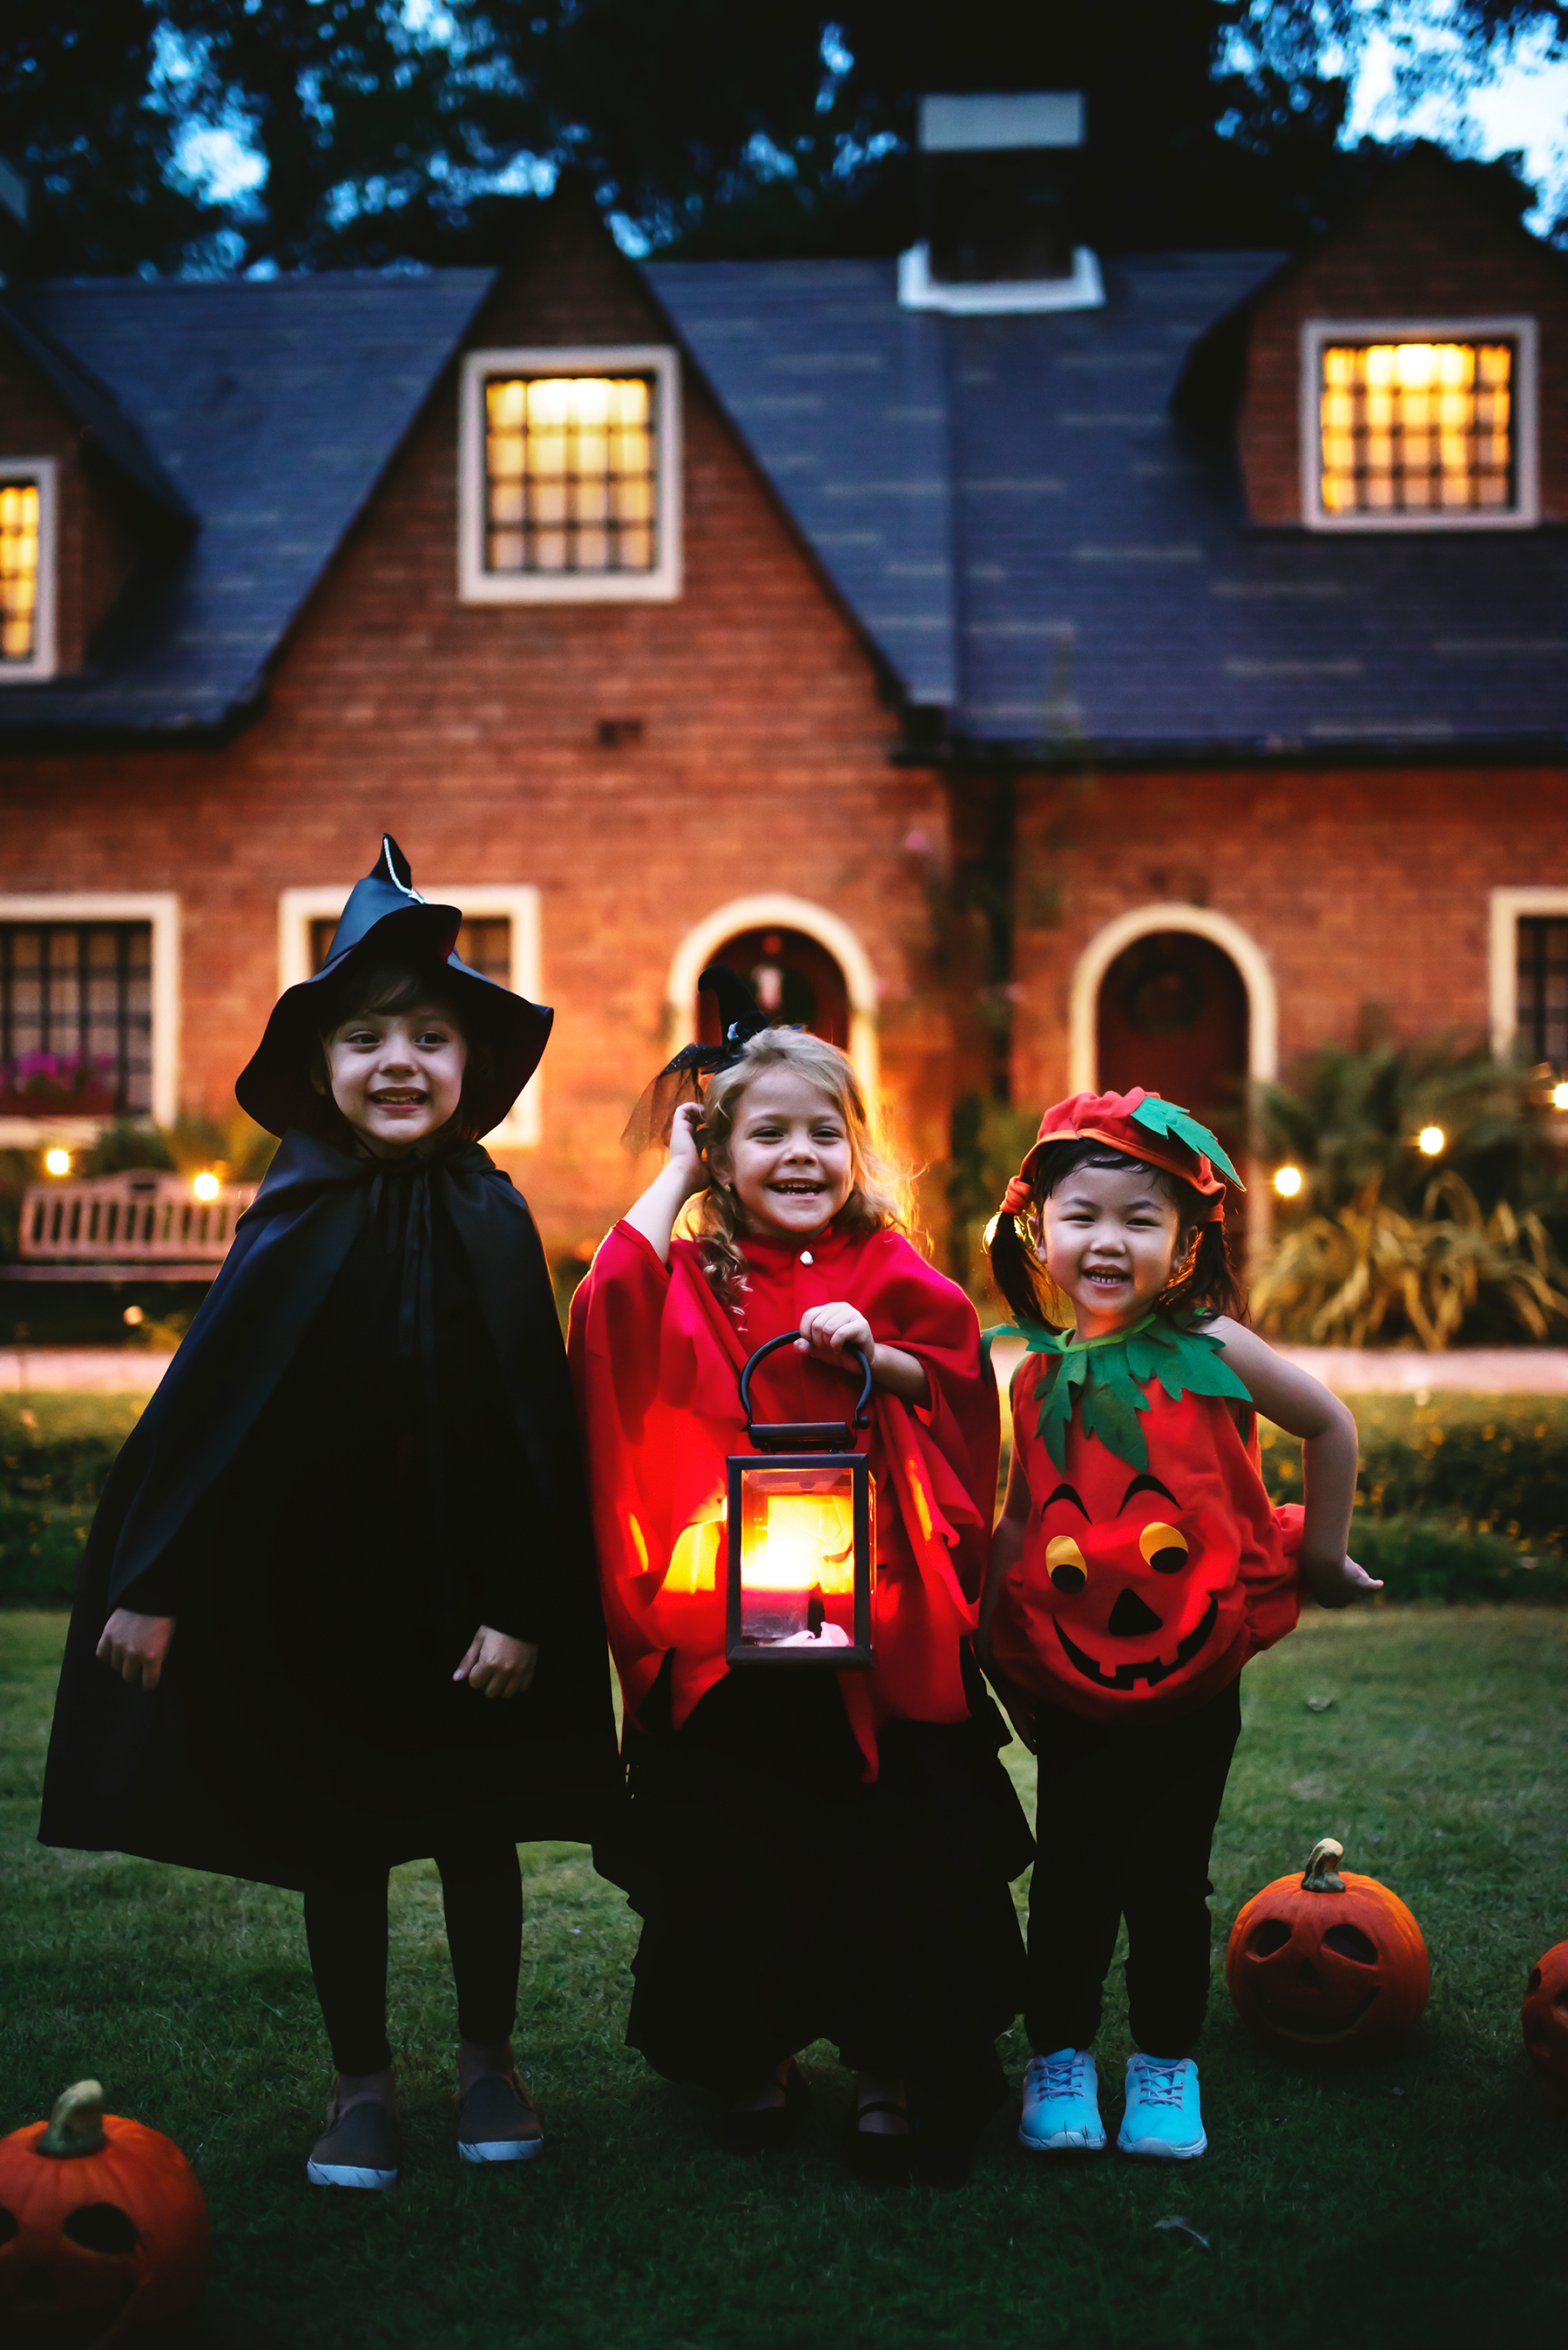 Trick-Or-Treat Safety To Teach Young Children